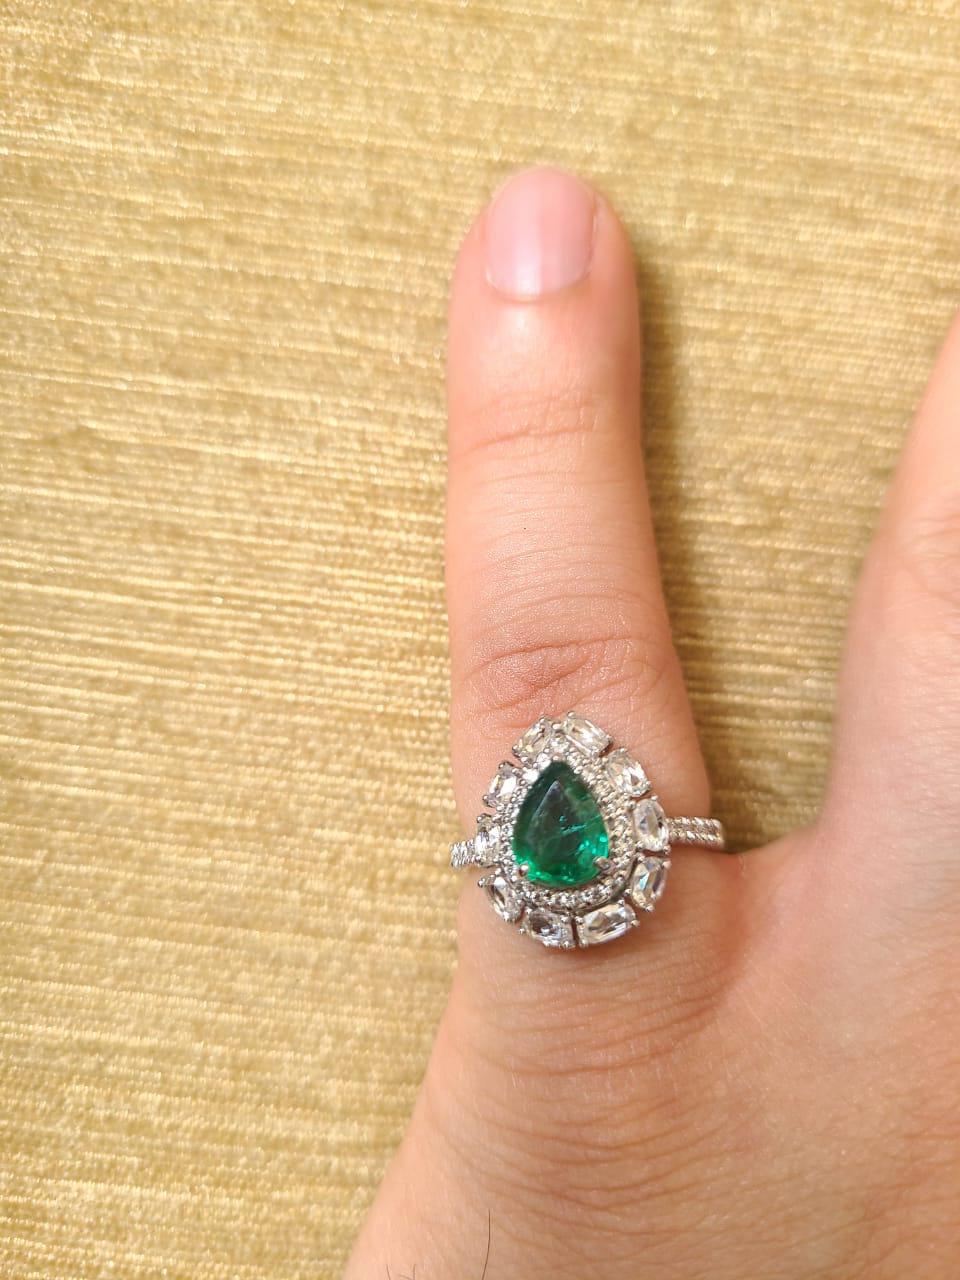 A very gorgeous and one of a kind Emerald Engagement/ Cocktail Ring set in 18K White Gold & Diamonds. The weight of the Emerald is 0.96 carats. The Emerald is completely natural, without any treatment & is of Zambian origin. The combined weight of